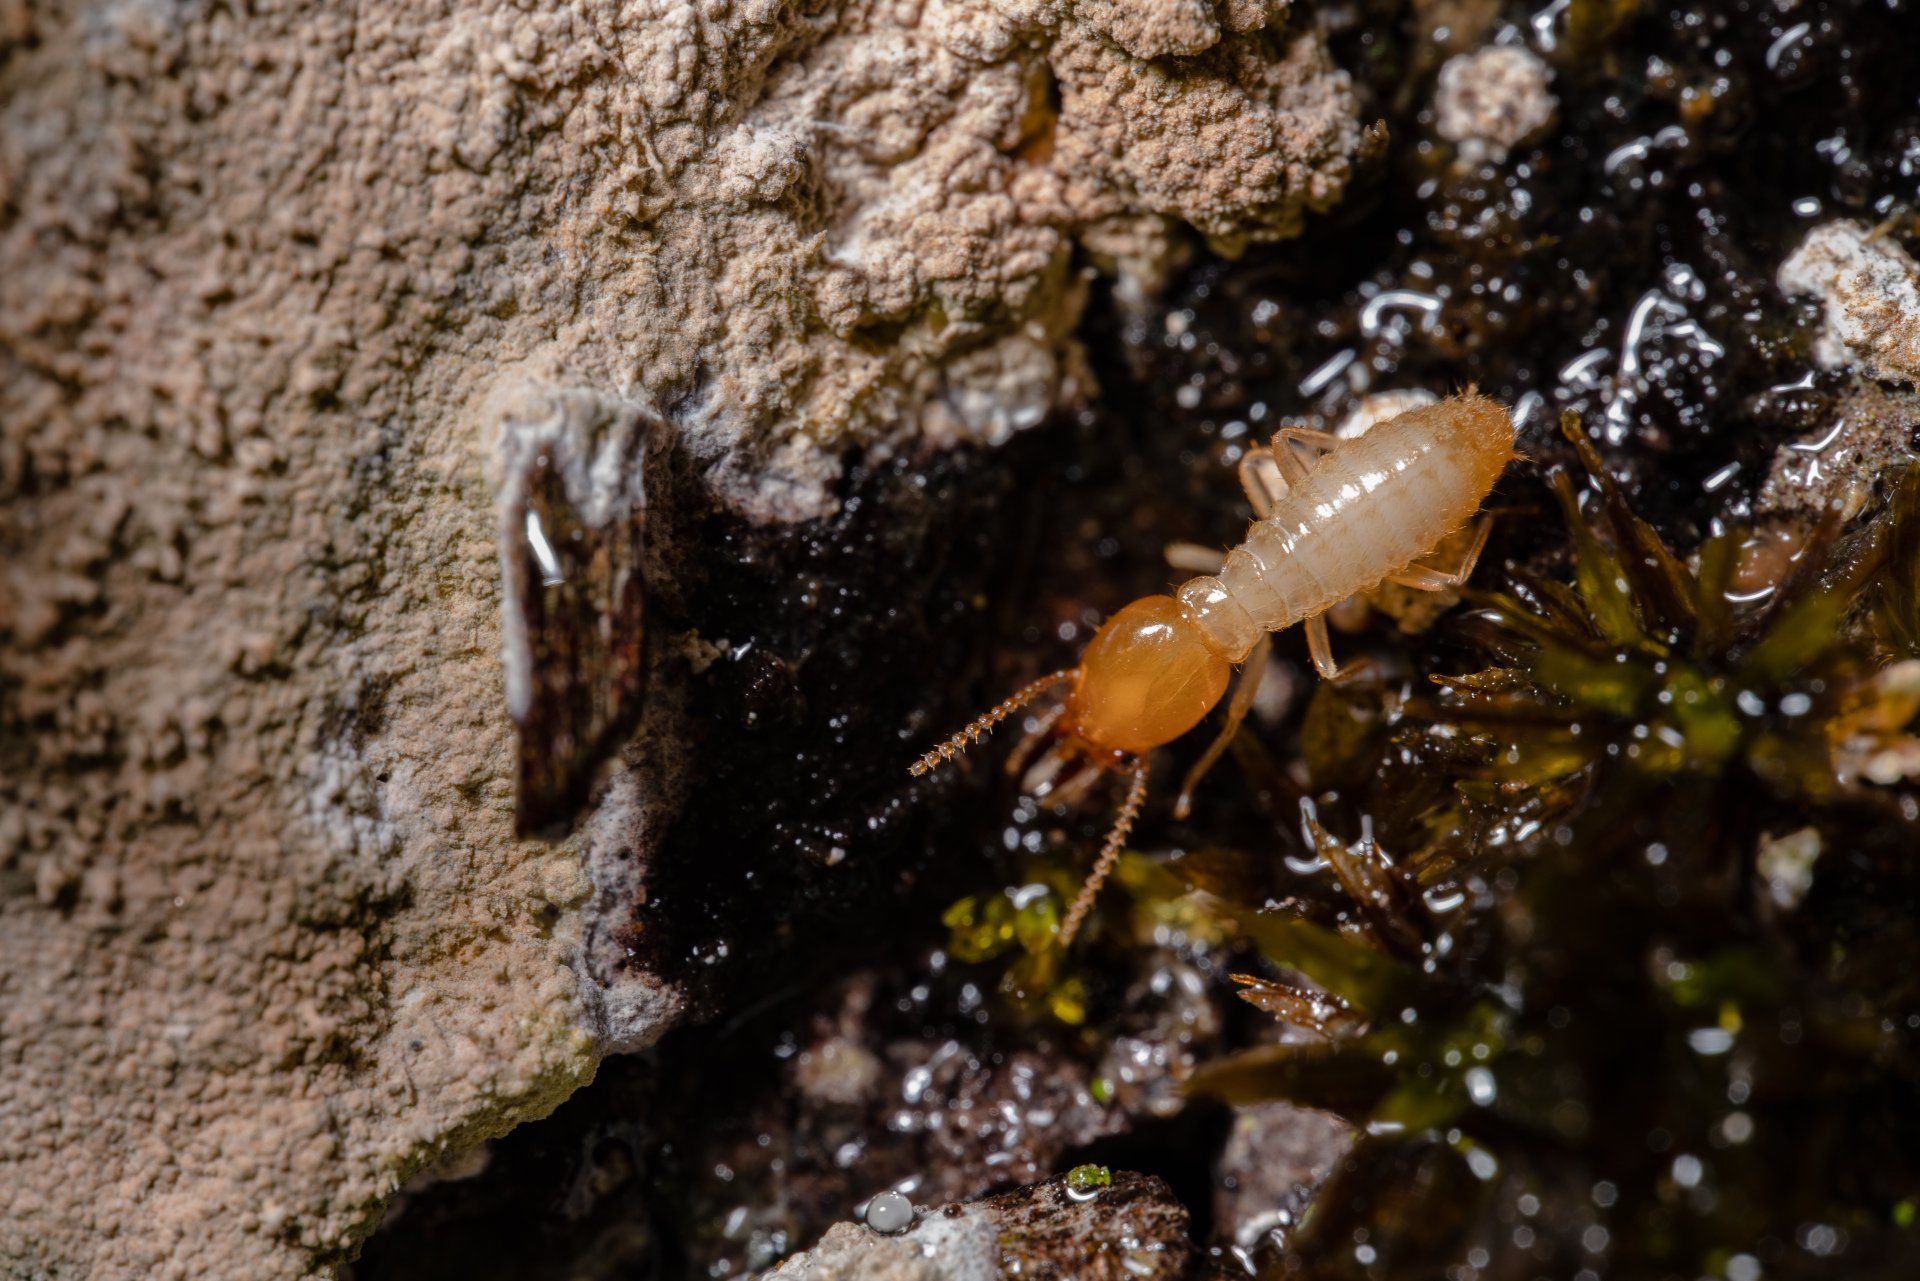 a termite is crawling on a rock in the water .